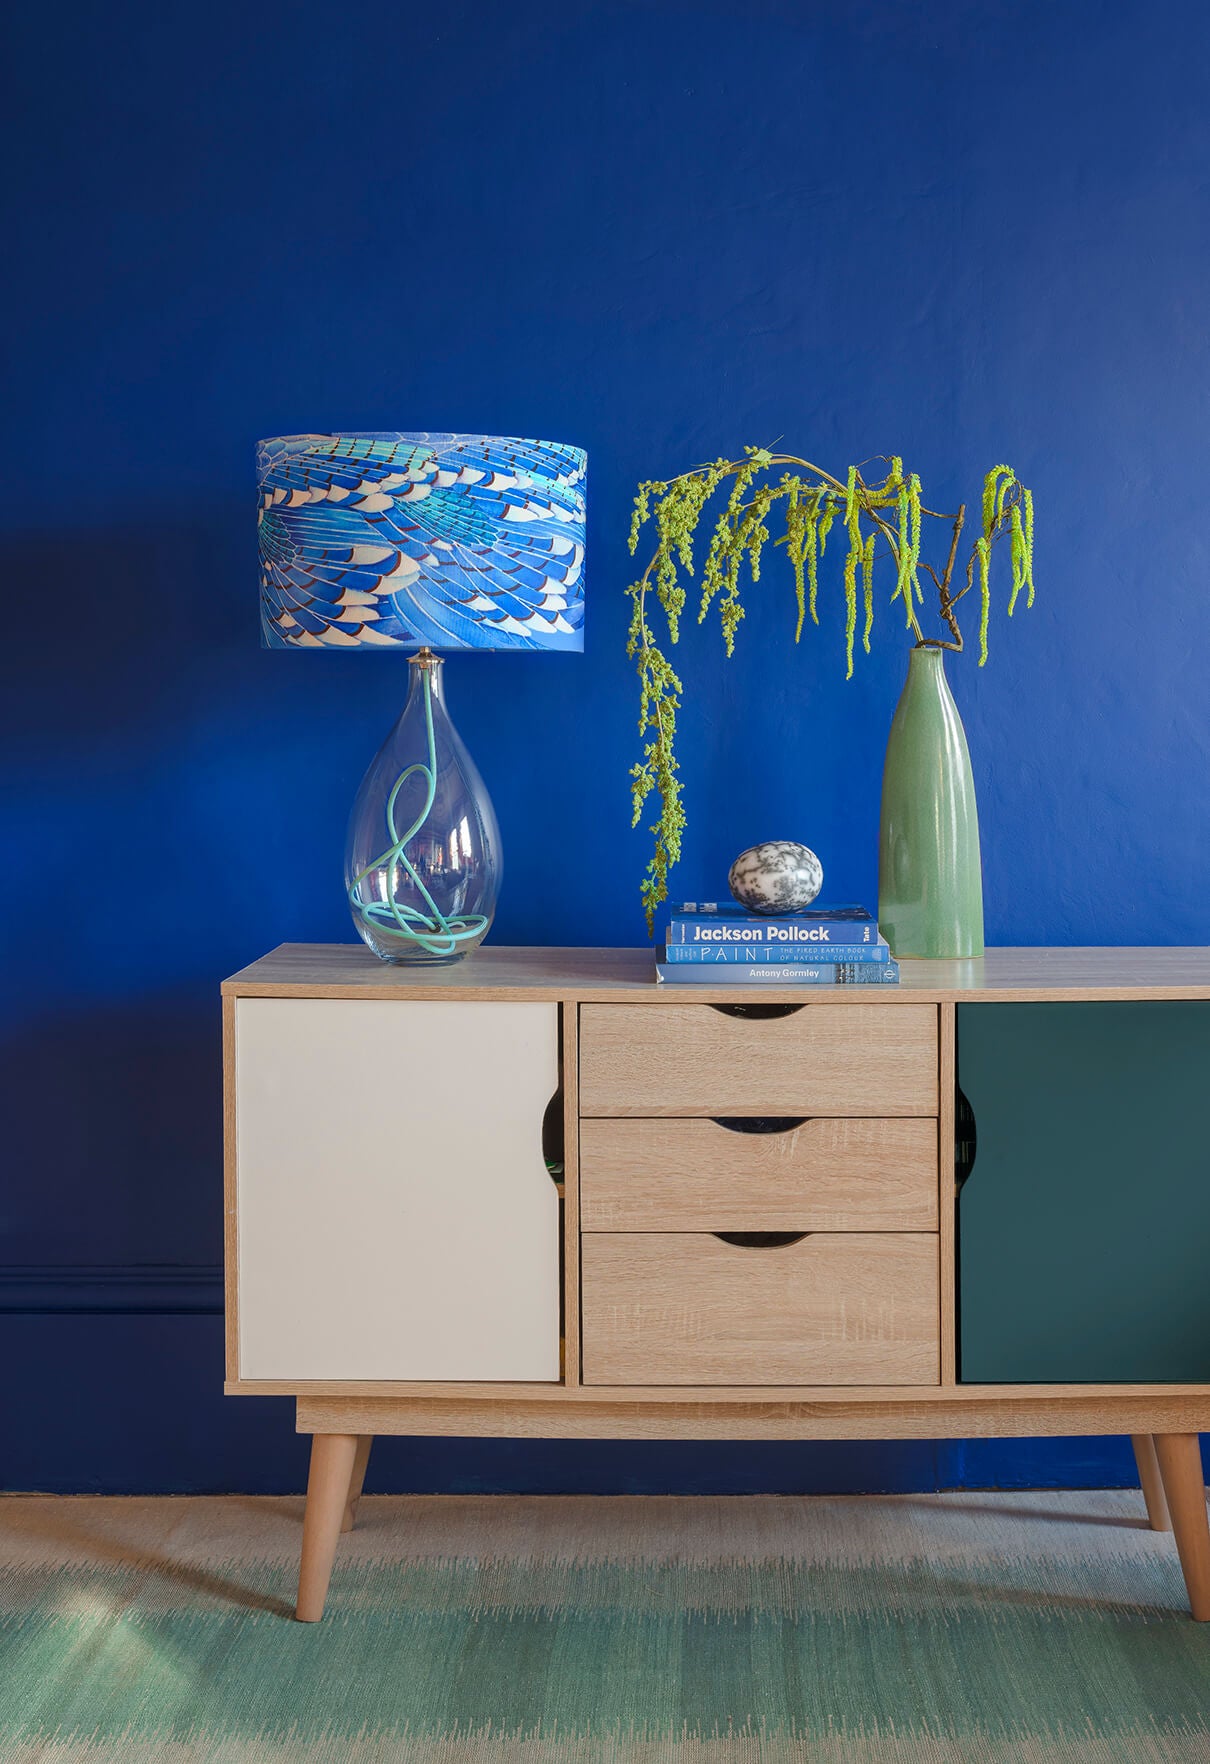 Blue Jay Wing on Jade flex by Anna Jacobs in a lifestyle setting